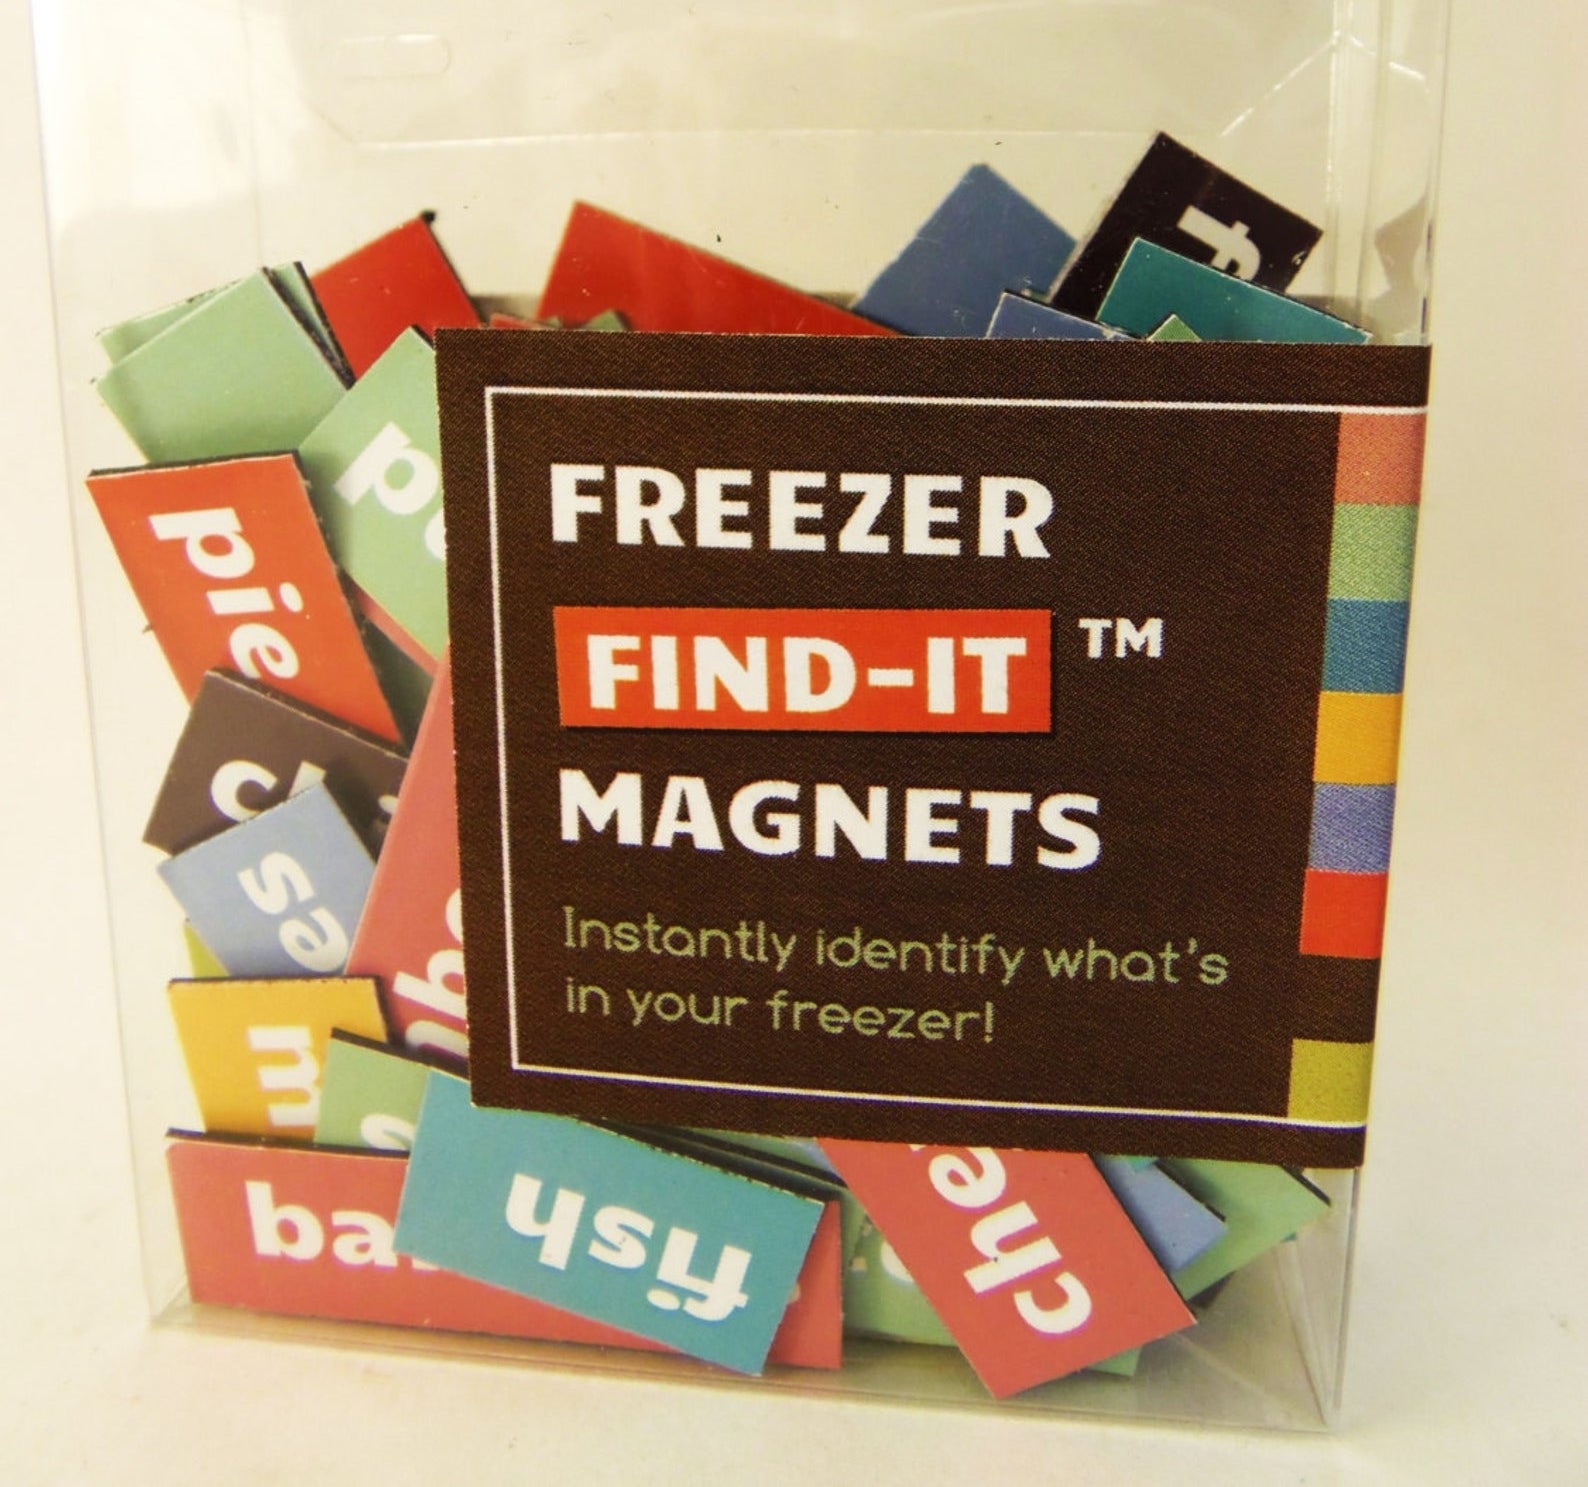 a container of freezer magnets